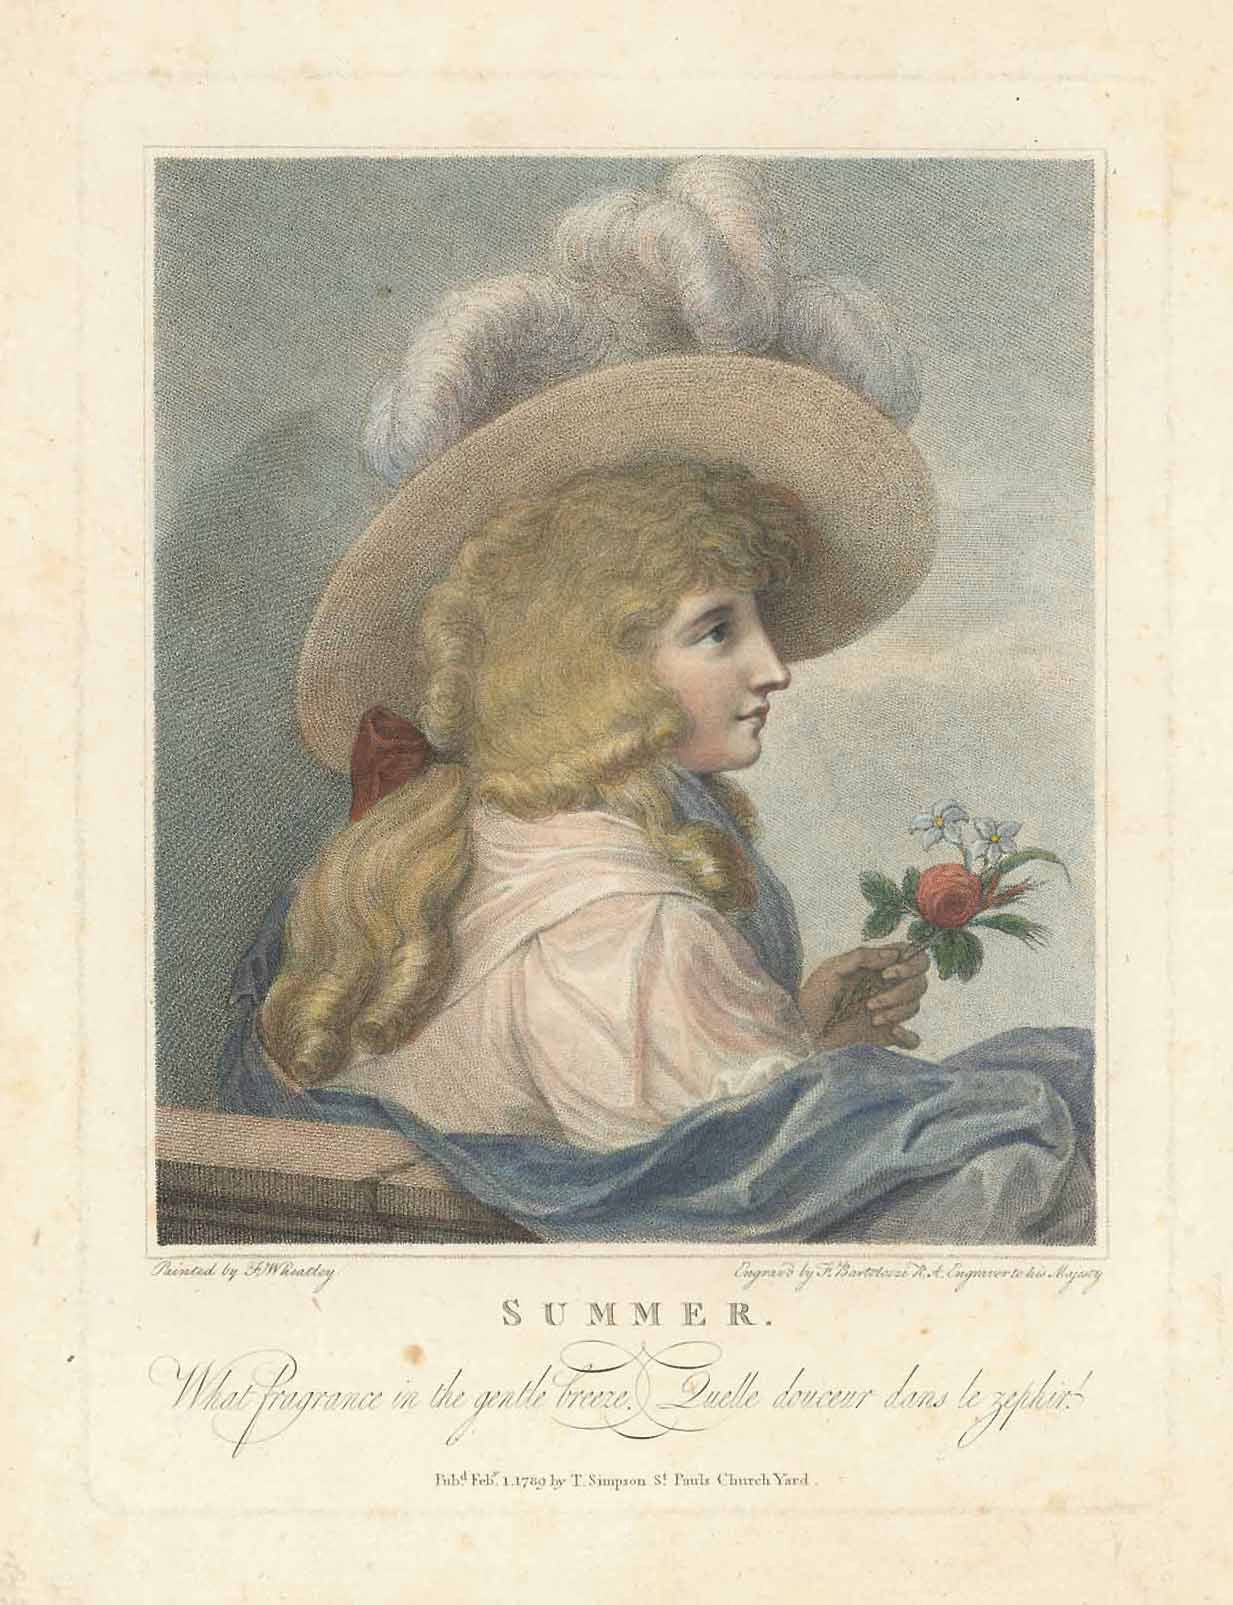 "Summer"  With Subtitel in English and in French: "What Fragrance in the gentle breeze - Quelle douceur dans le zephyr!"  Hand-colored stipple copper etching by Francesco Bartolozzi (1727-1815)  After the painting by Francis Wheatley (1747-1801)  London, dated 1789  Original antique print , interior design, wall decoration, ideas, idea, gift ideas, present, vintage, charming, special, decoration, home interior, living room design